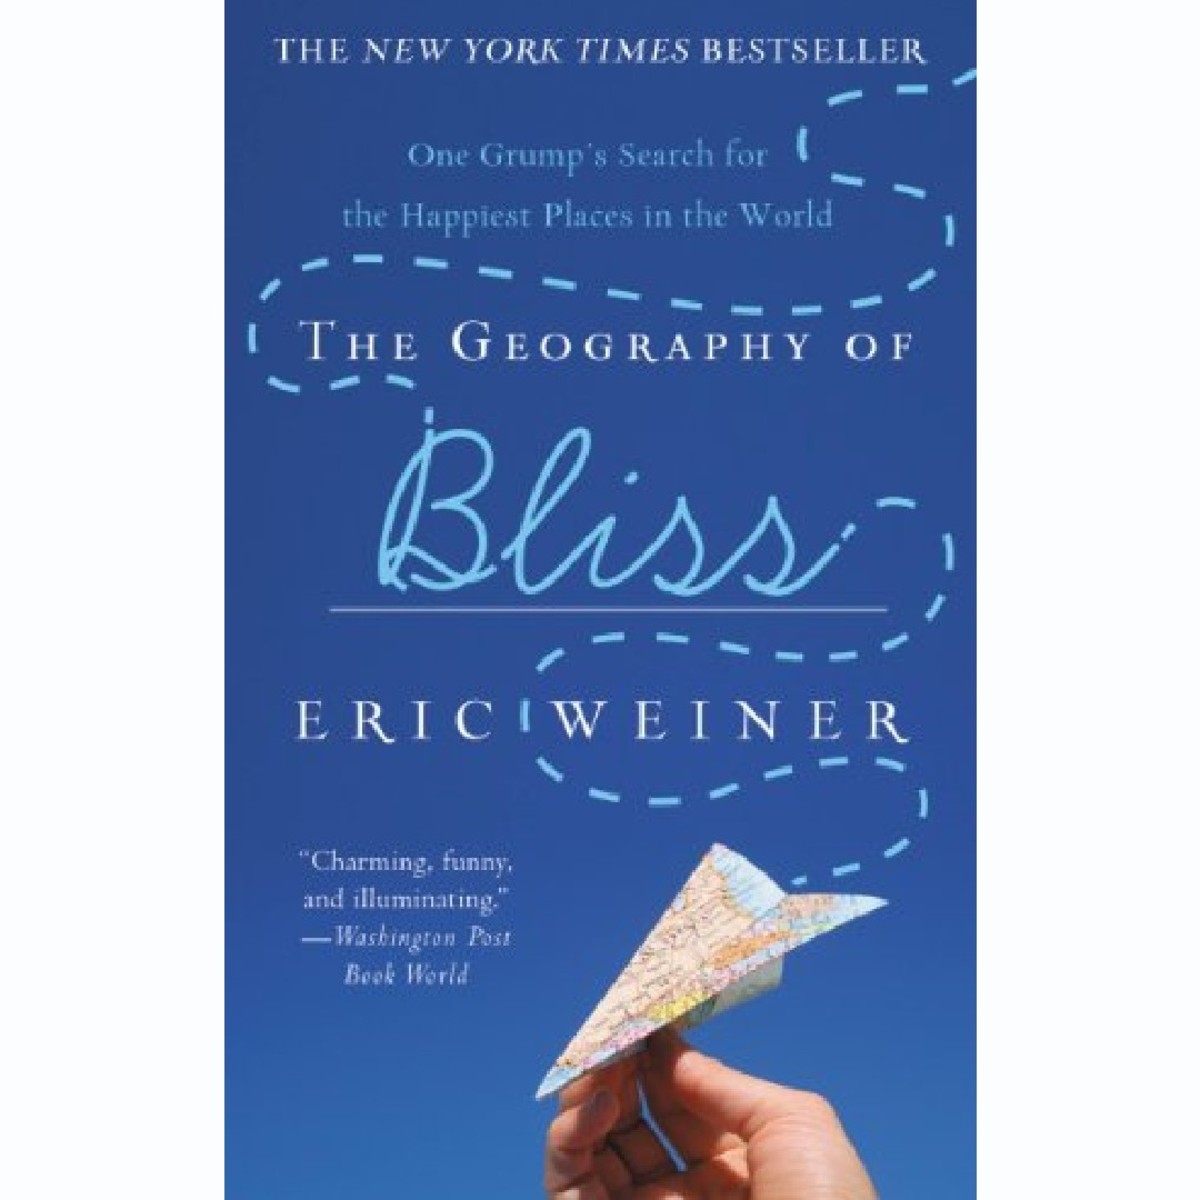 'The Geography of Bliss: One Grump's Search for the Happiest Places in the World' by Eric Weiner